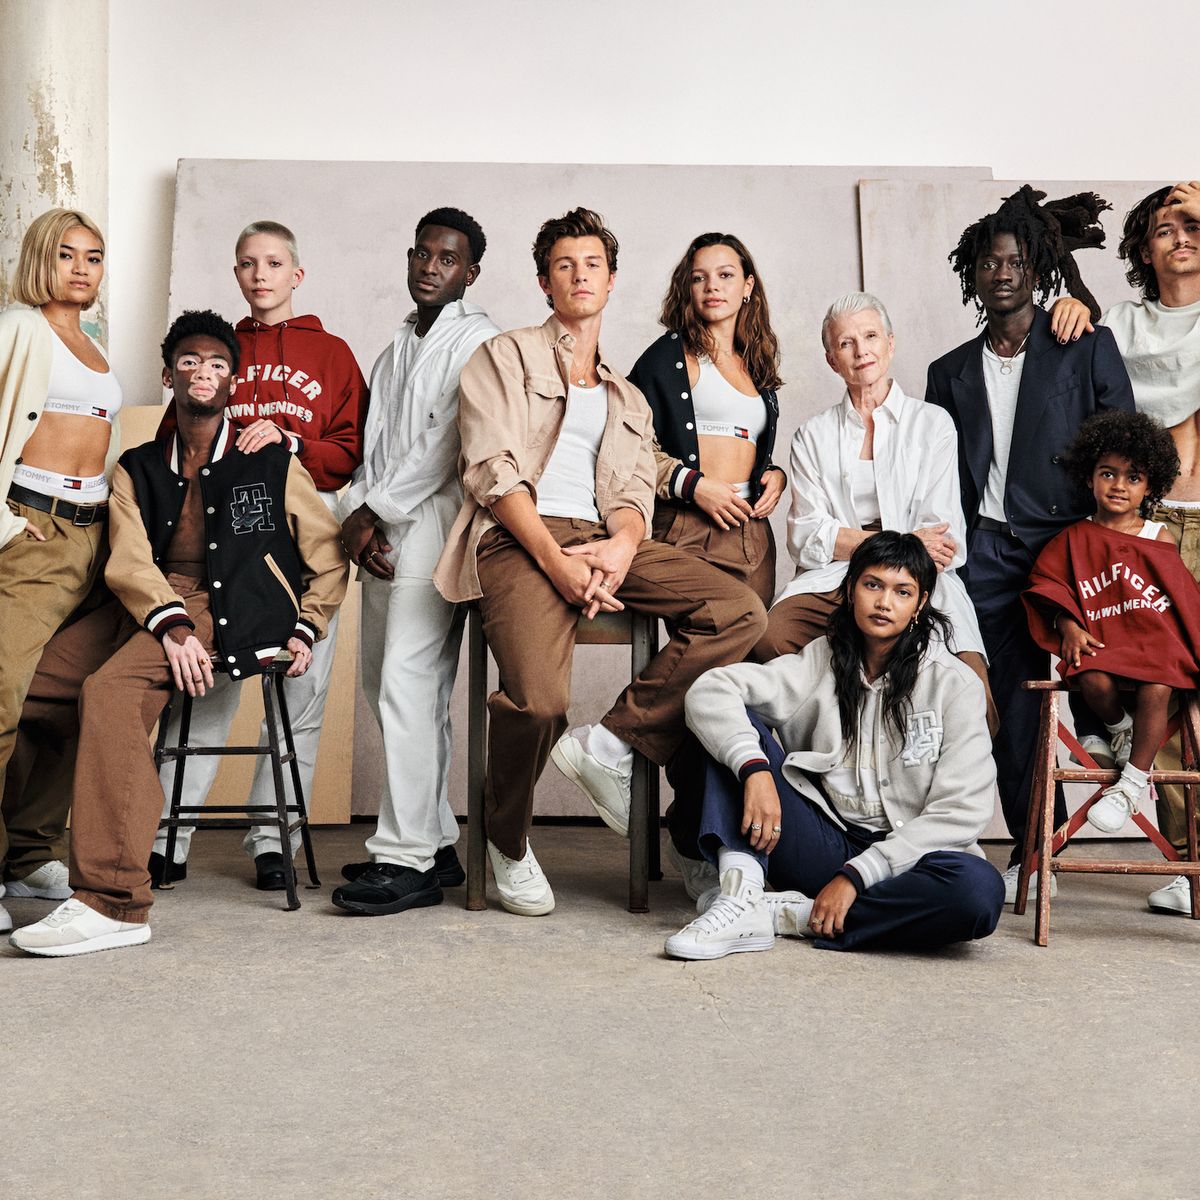 Meet the Latest Tommy Hilfiger Collection You're Going to Love